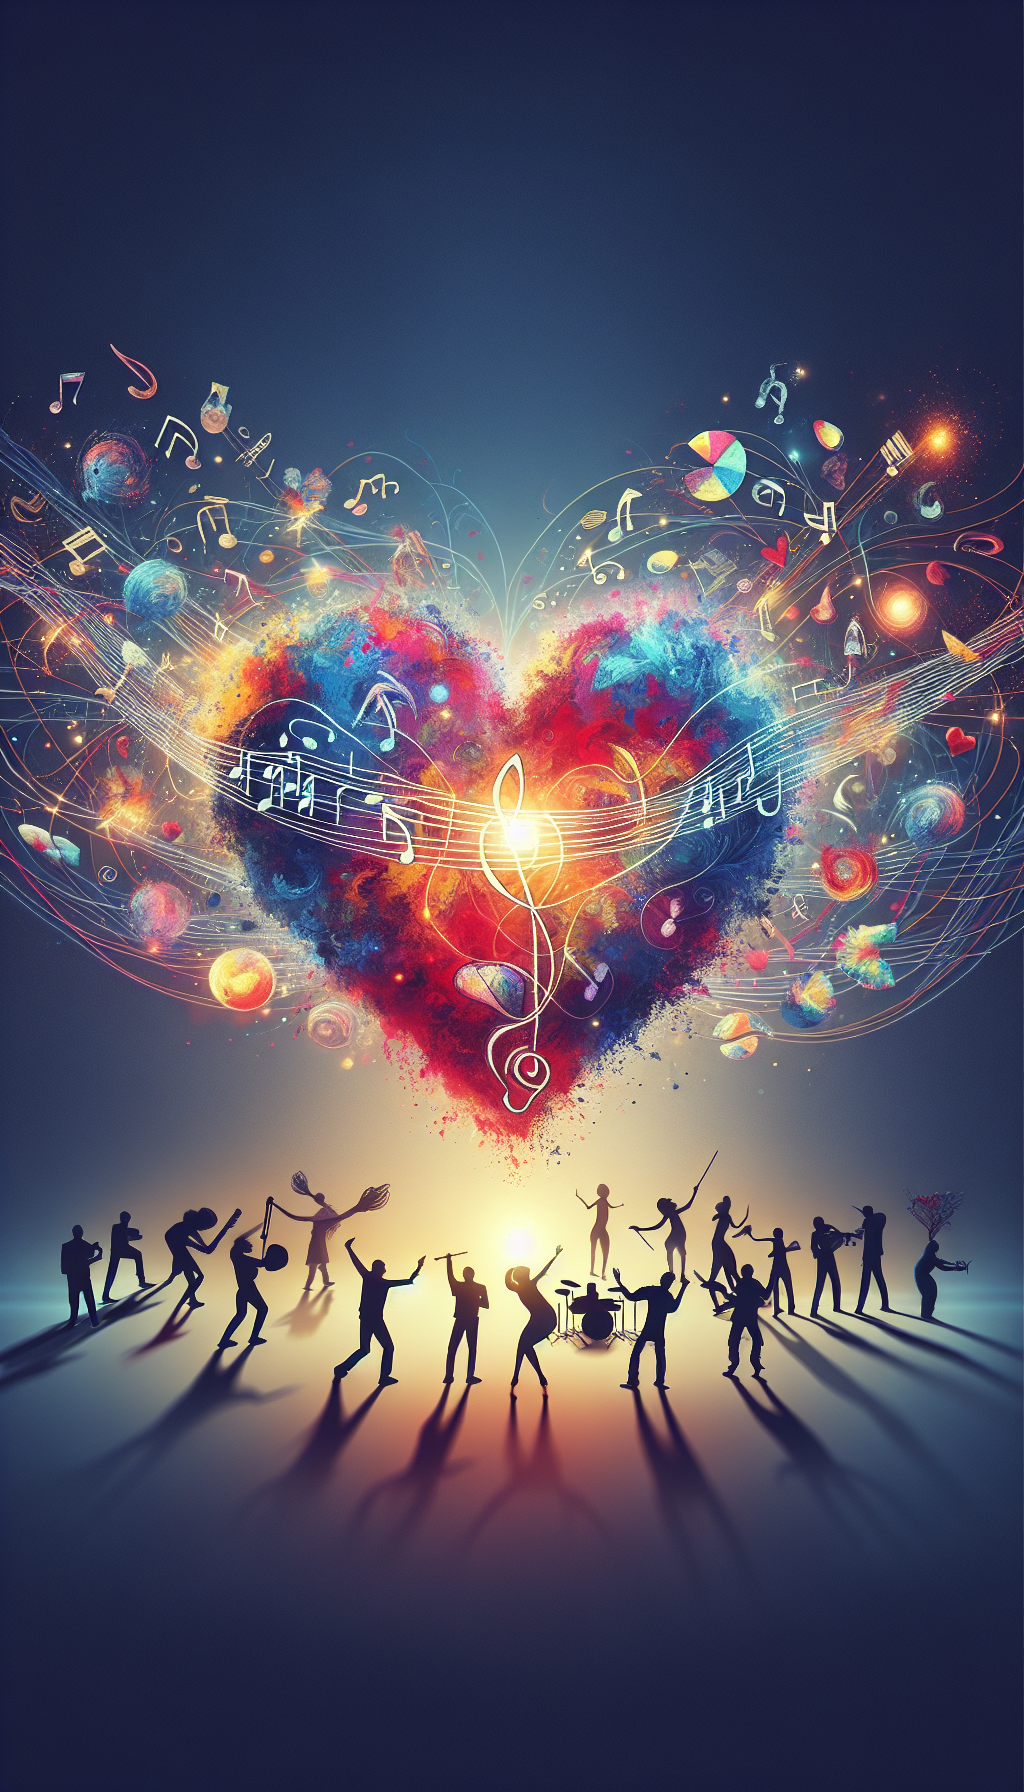 An illustration depicts a heart composed of vibrant paint strokes and musical notes at its center. Around it, silhouetted figures are engaged in various acts of artistic creation—dance, painting, sculpture, theater—each connected to the heart by delicate, glistening threads, symbolizing the intrinsic value and emotional essence arts infuse into human experience. The styles range from realistic to abstract, embodying art's diverse impact.